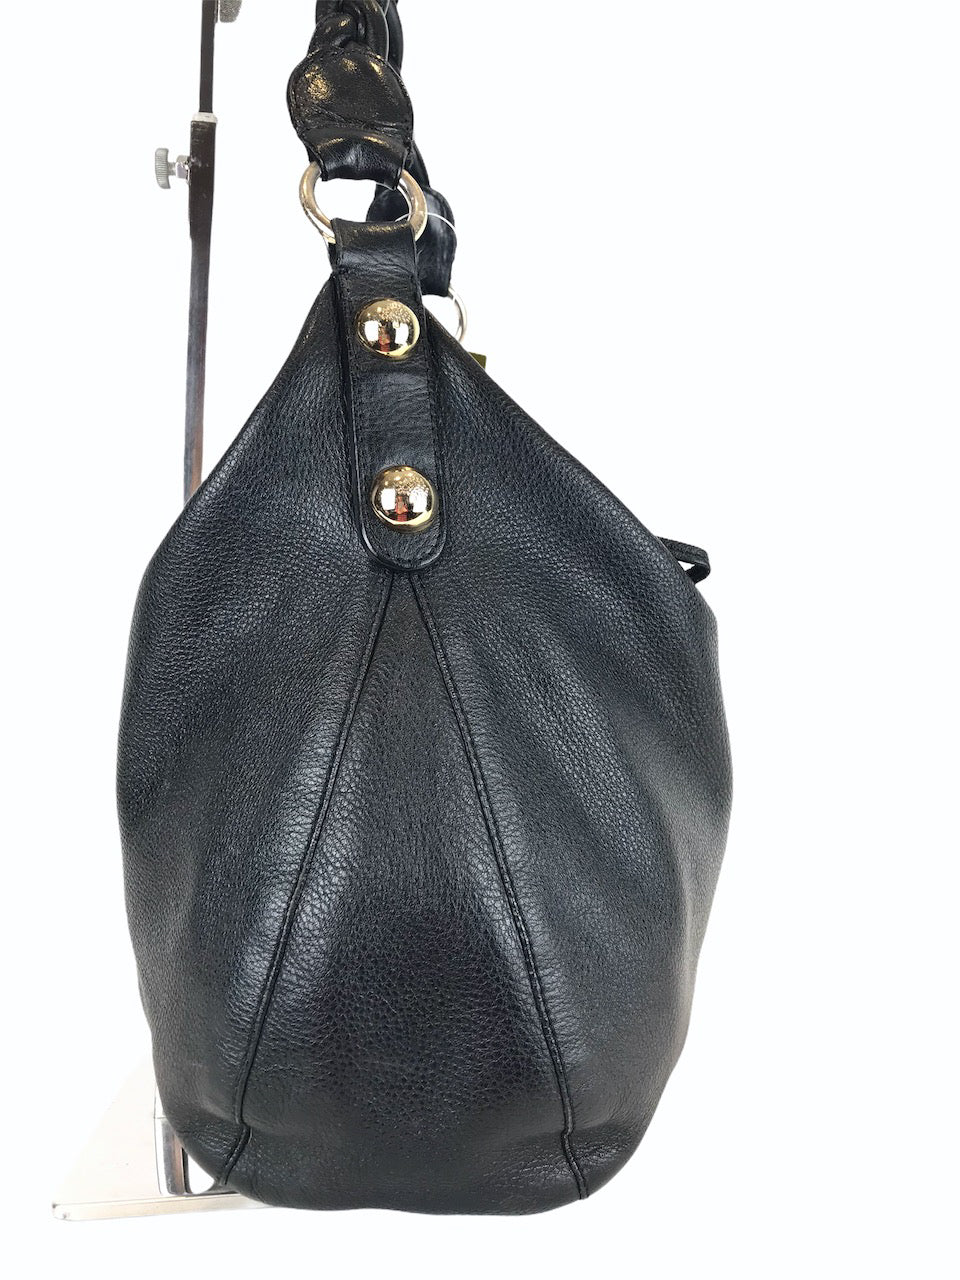 Mulberry Black Leather Mitzy Hobo - As Seen On Instagram 09/09/2020 - Siopaella Designer Exchange